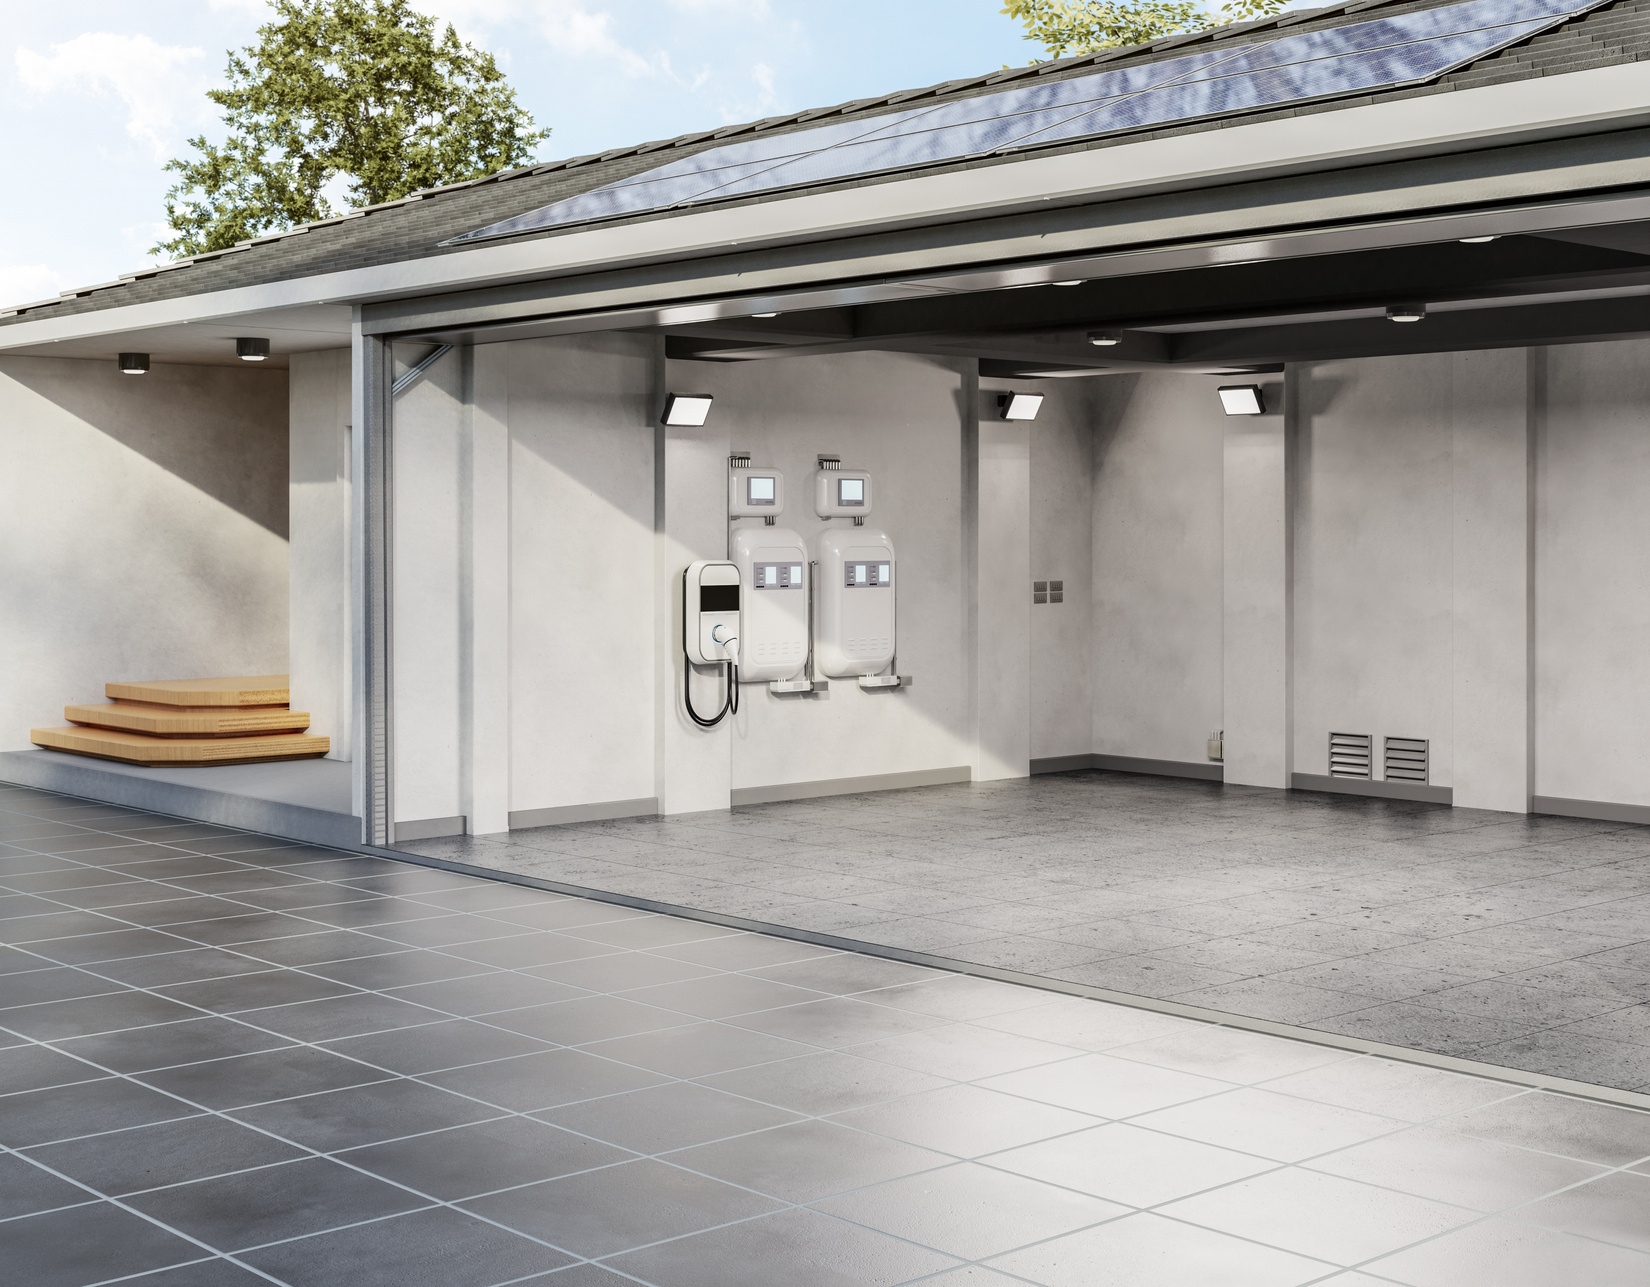 Solar panel on roof generate electricity for home garage with ev